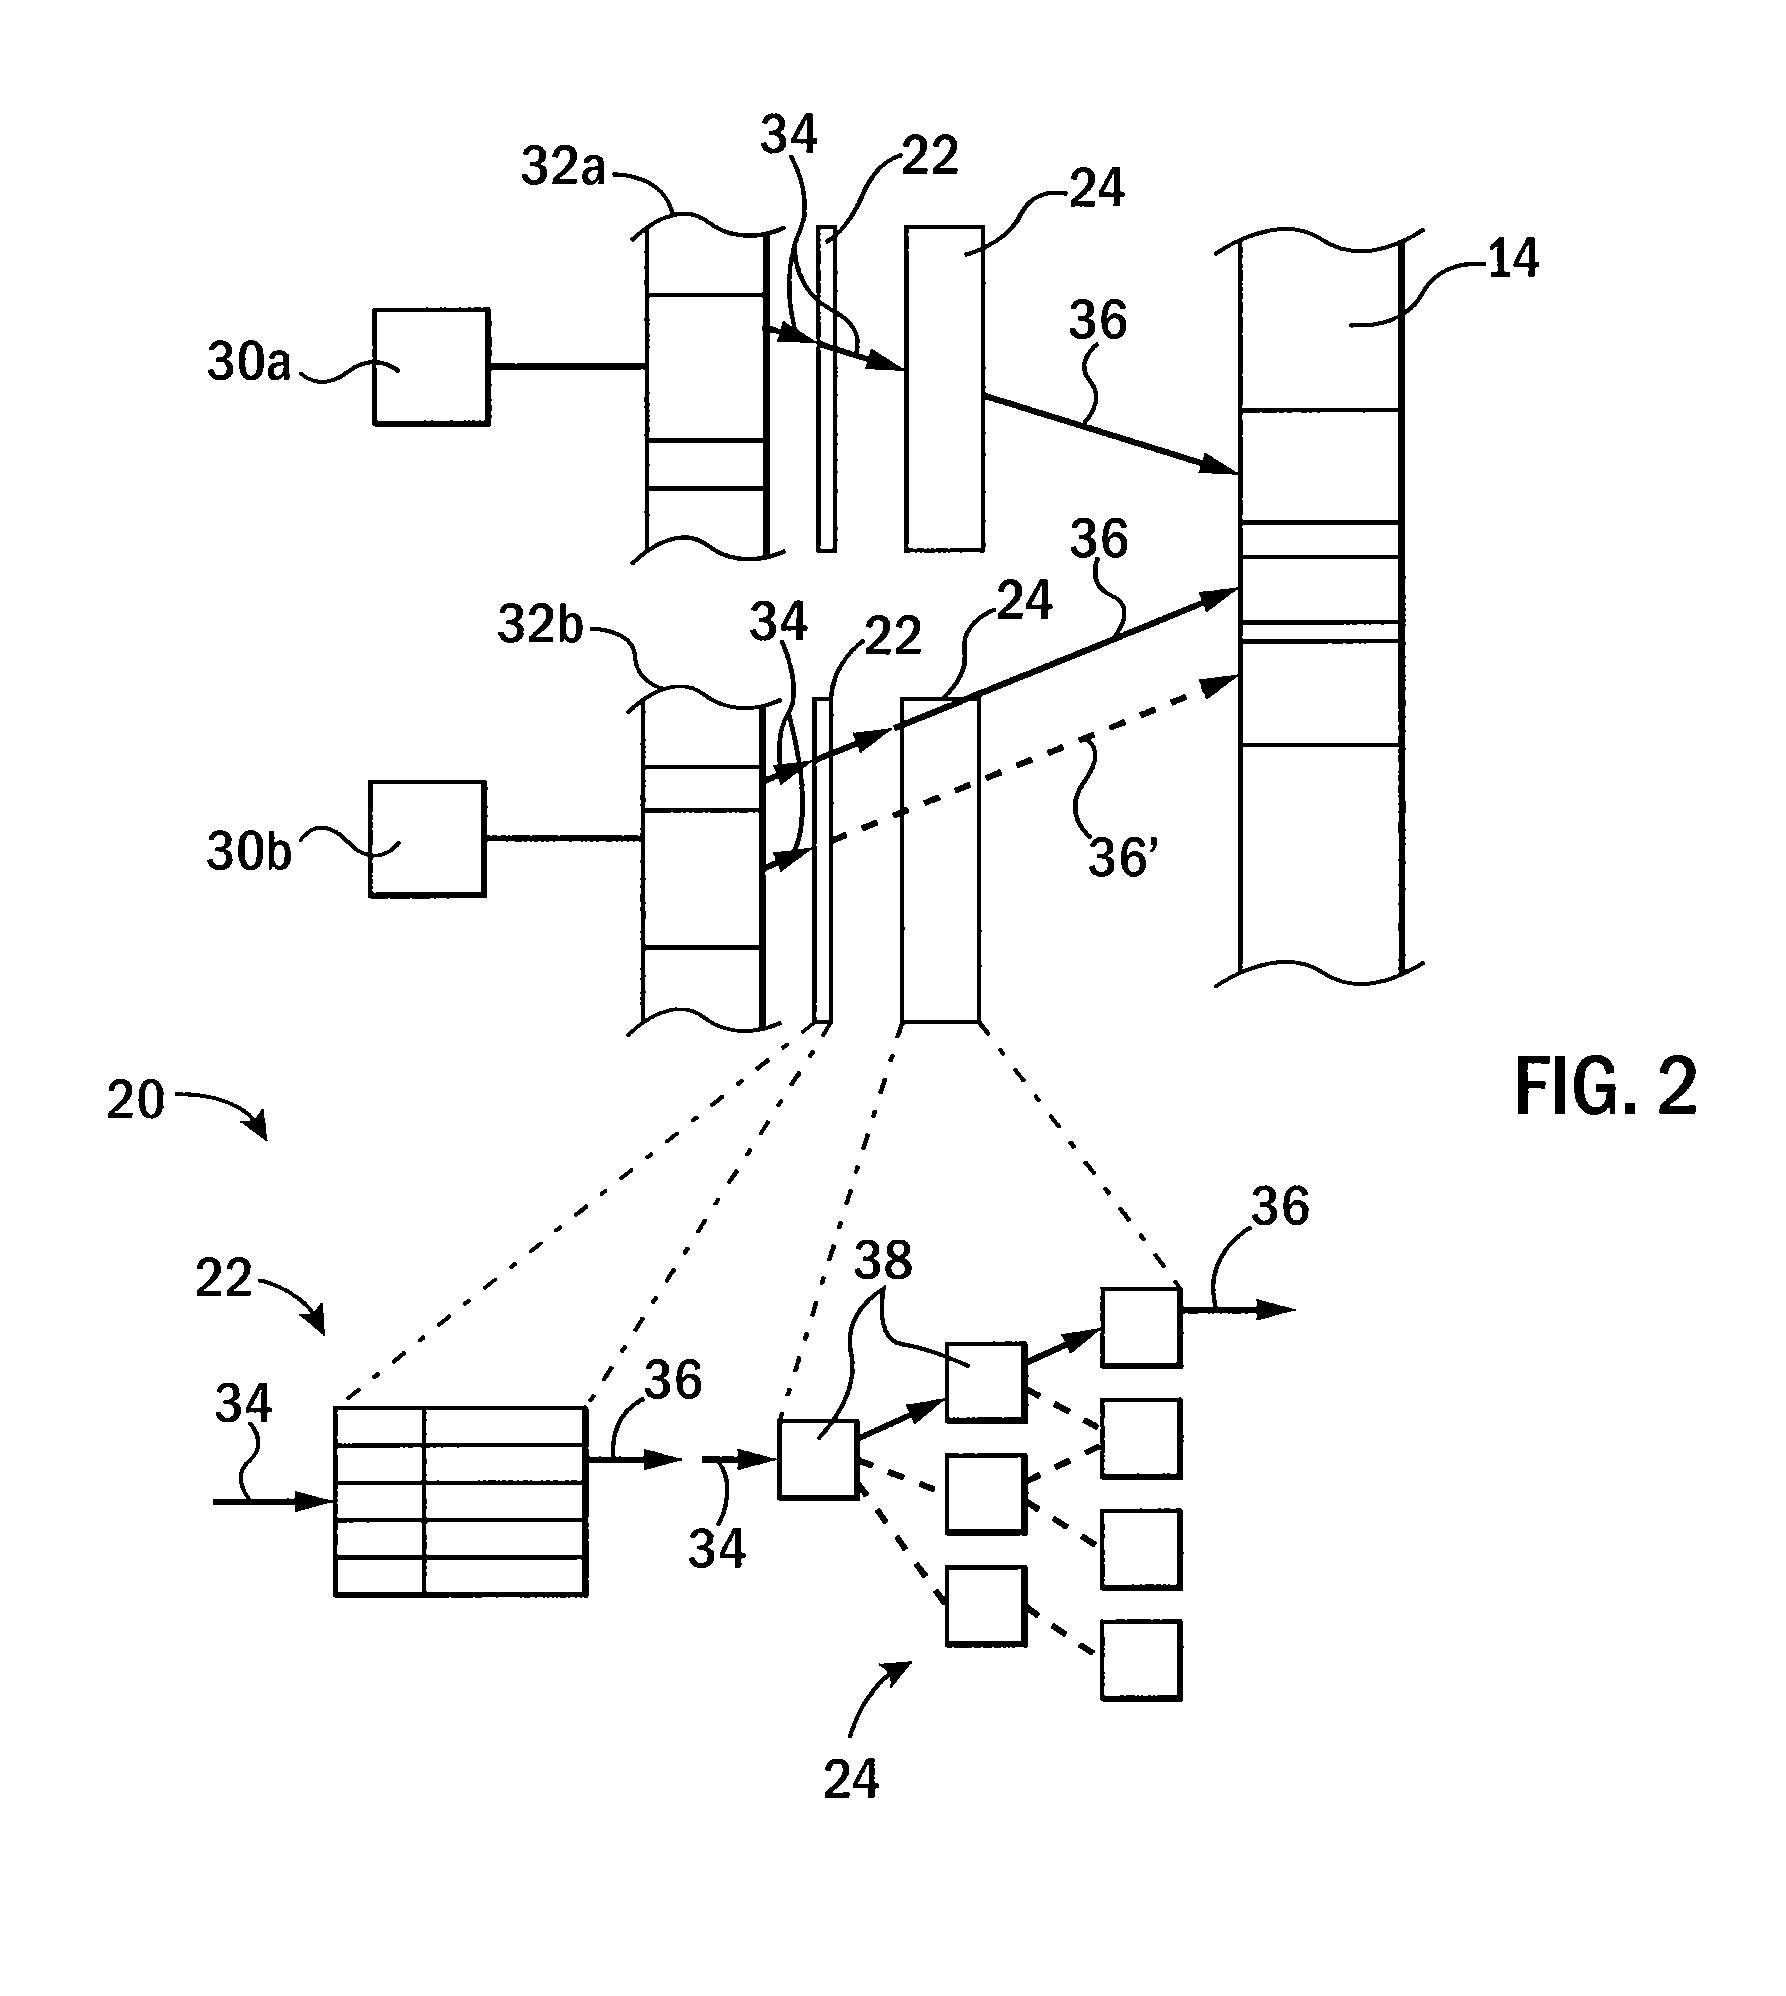 Virtual Memory Management System with Reduced Latency